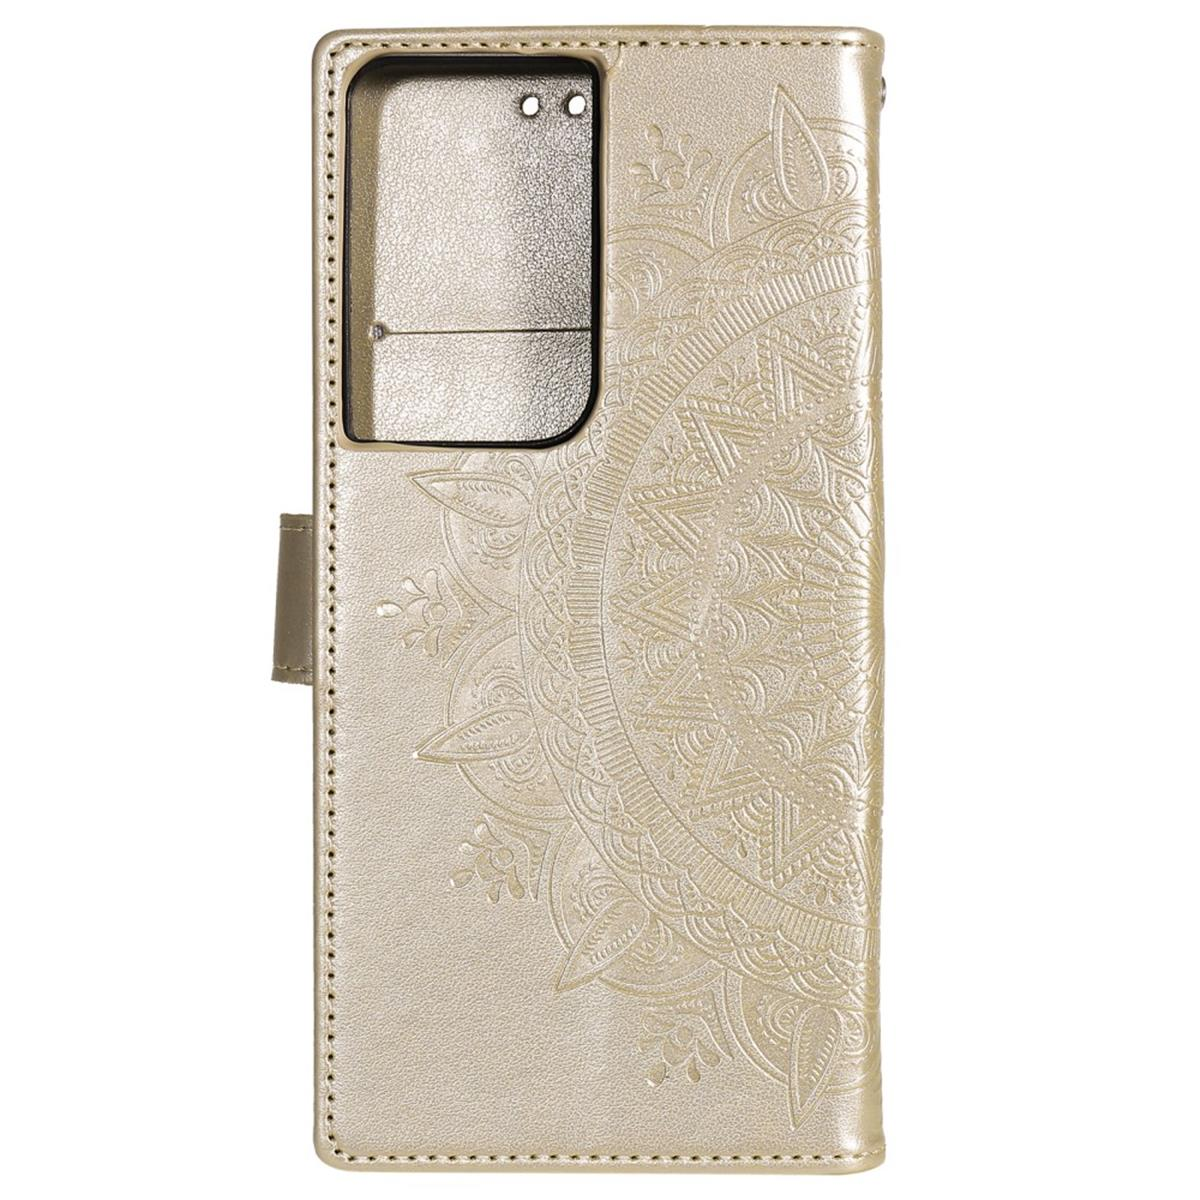 COVERKINGZ Klapphülle mit Mandala Muster, S21 Bookcover, Samsung, Gold Ultra, Galaxy